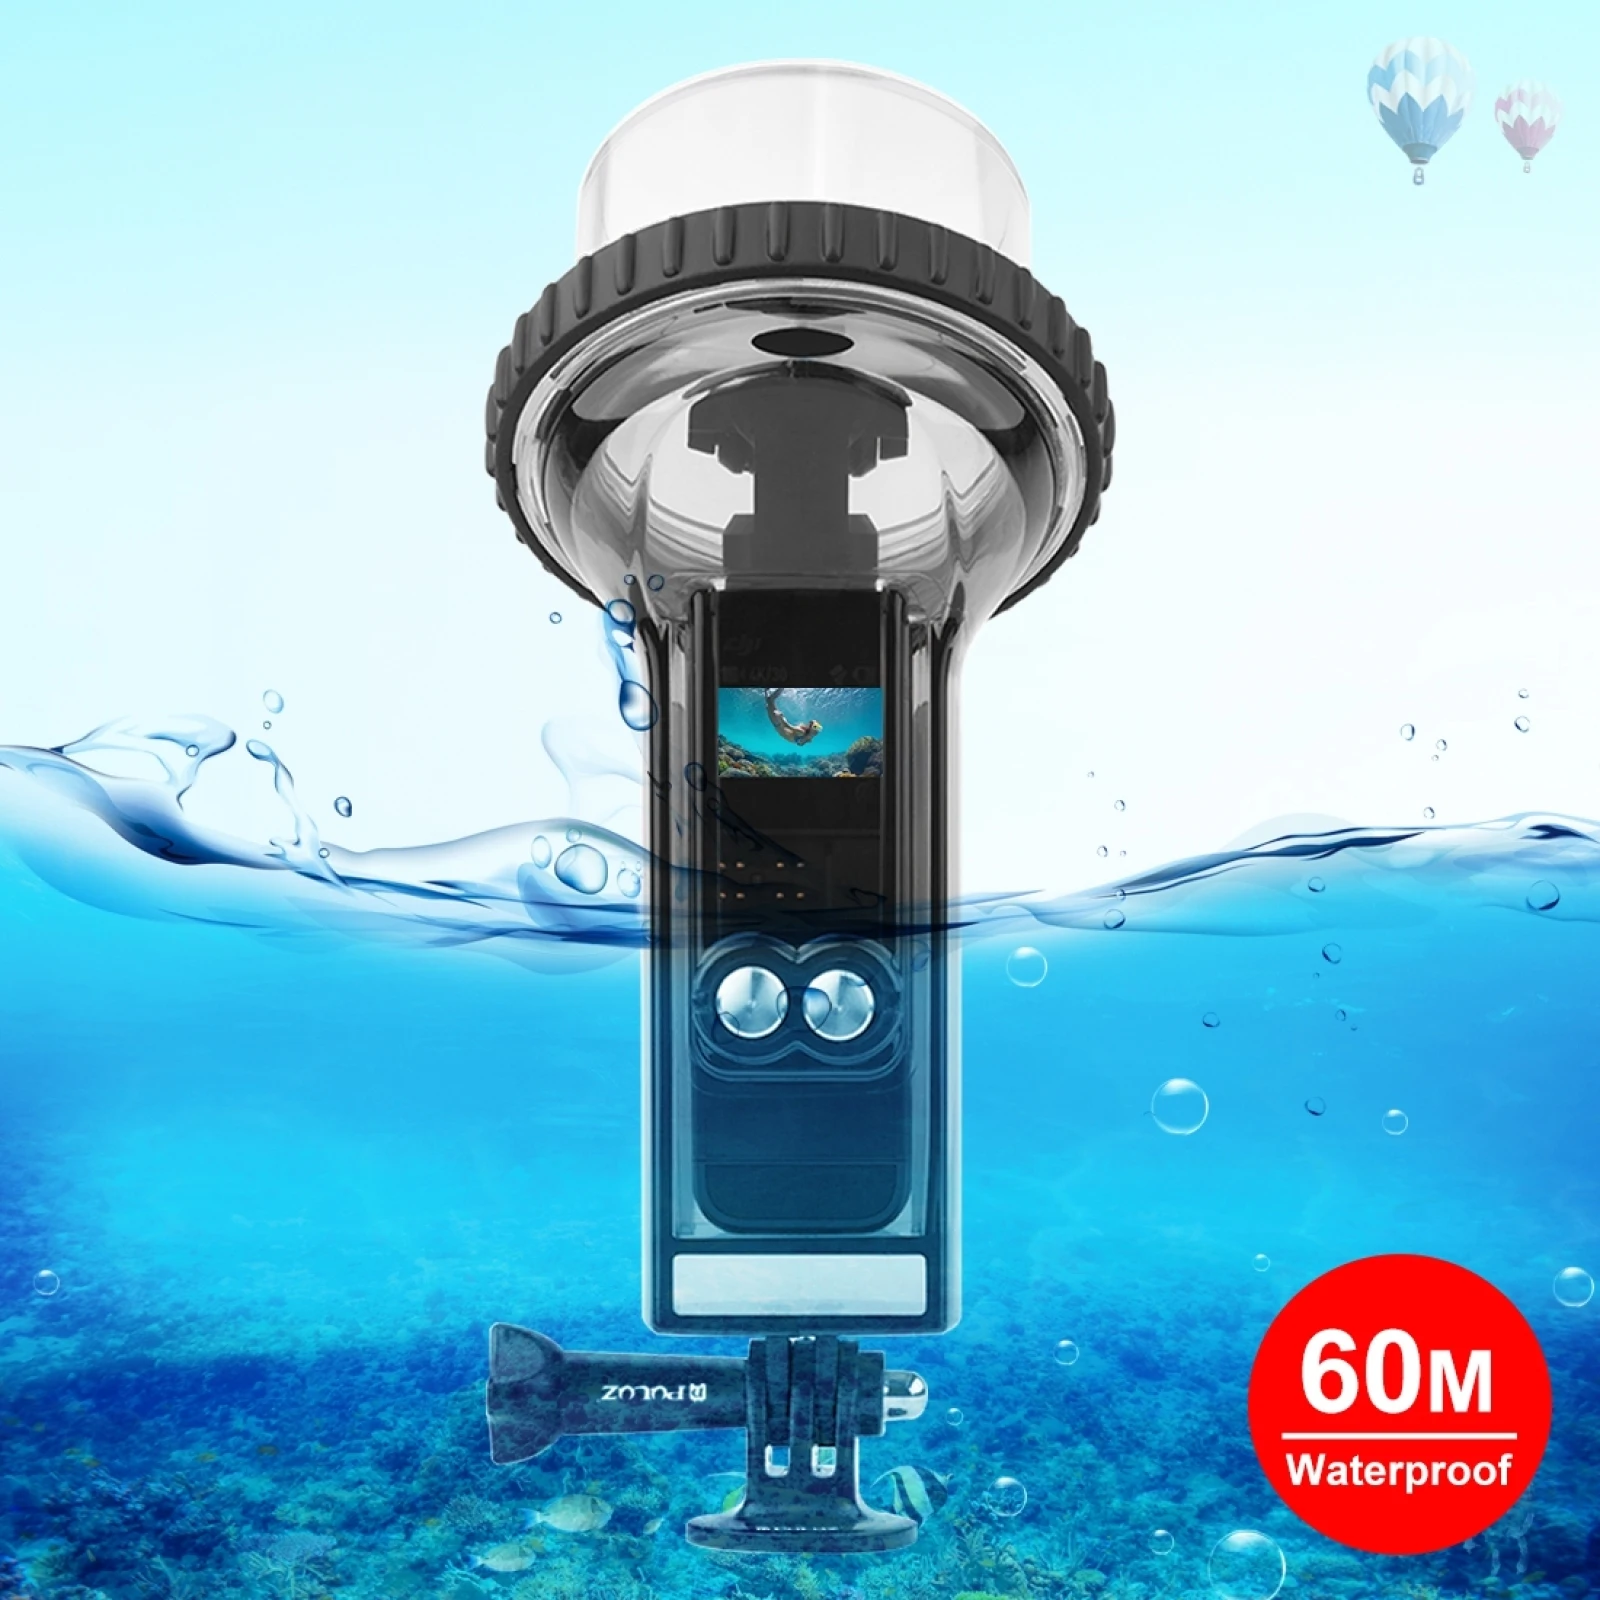 

60m Underwater Waterproof Housing Diving Case Cover For DJI Osmo Pocket 2 Diving Protective Shell Water Diving Cover